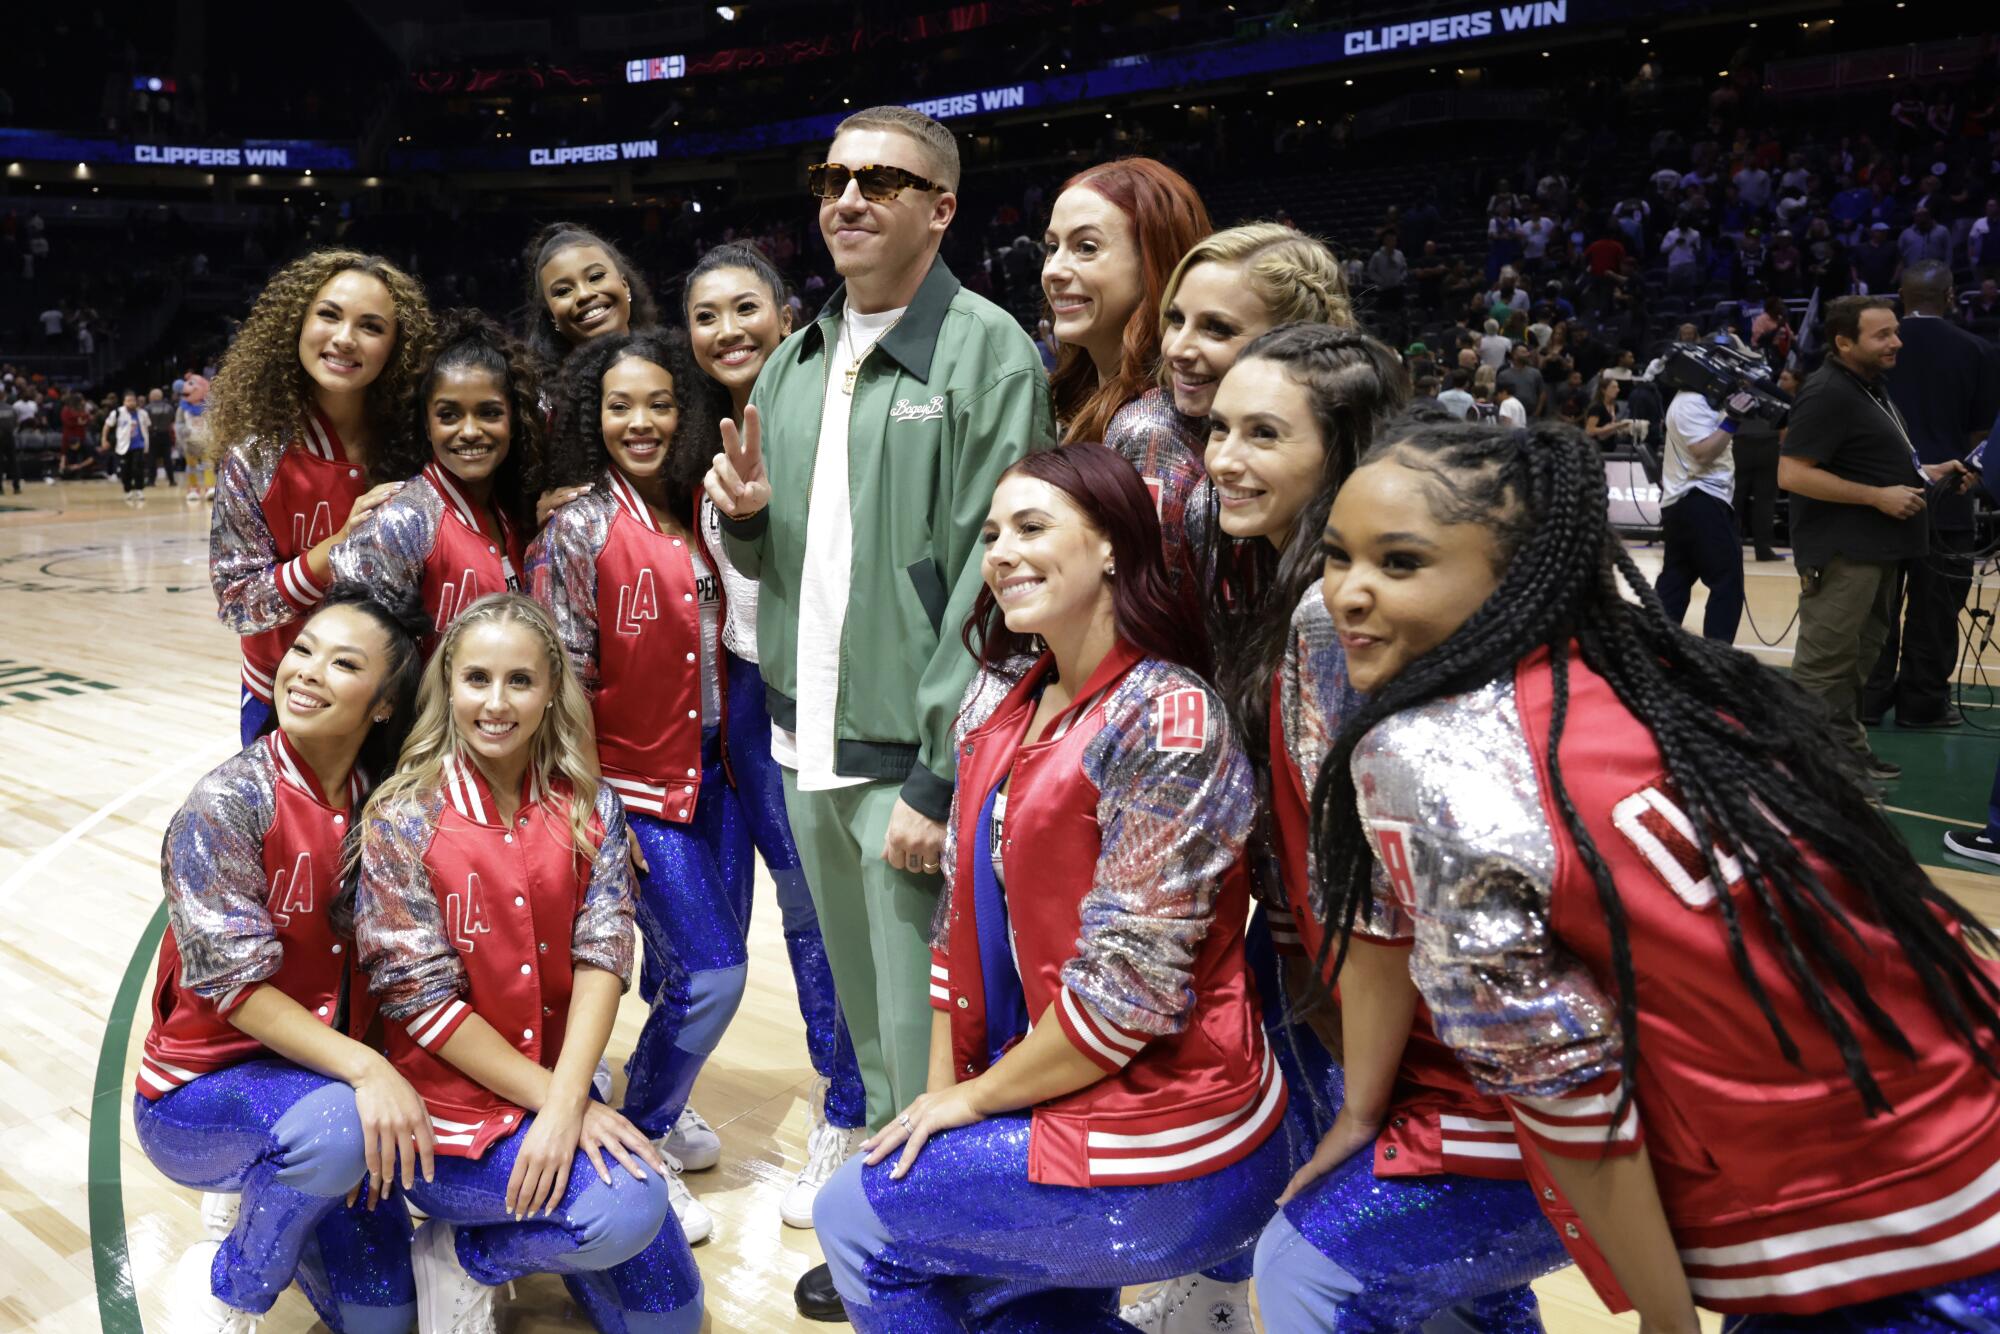 Rapper Macklemore poses with the Clippers dancers a preseason game at Climate Pledge Arena in Seattle.